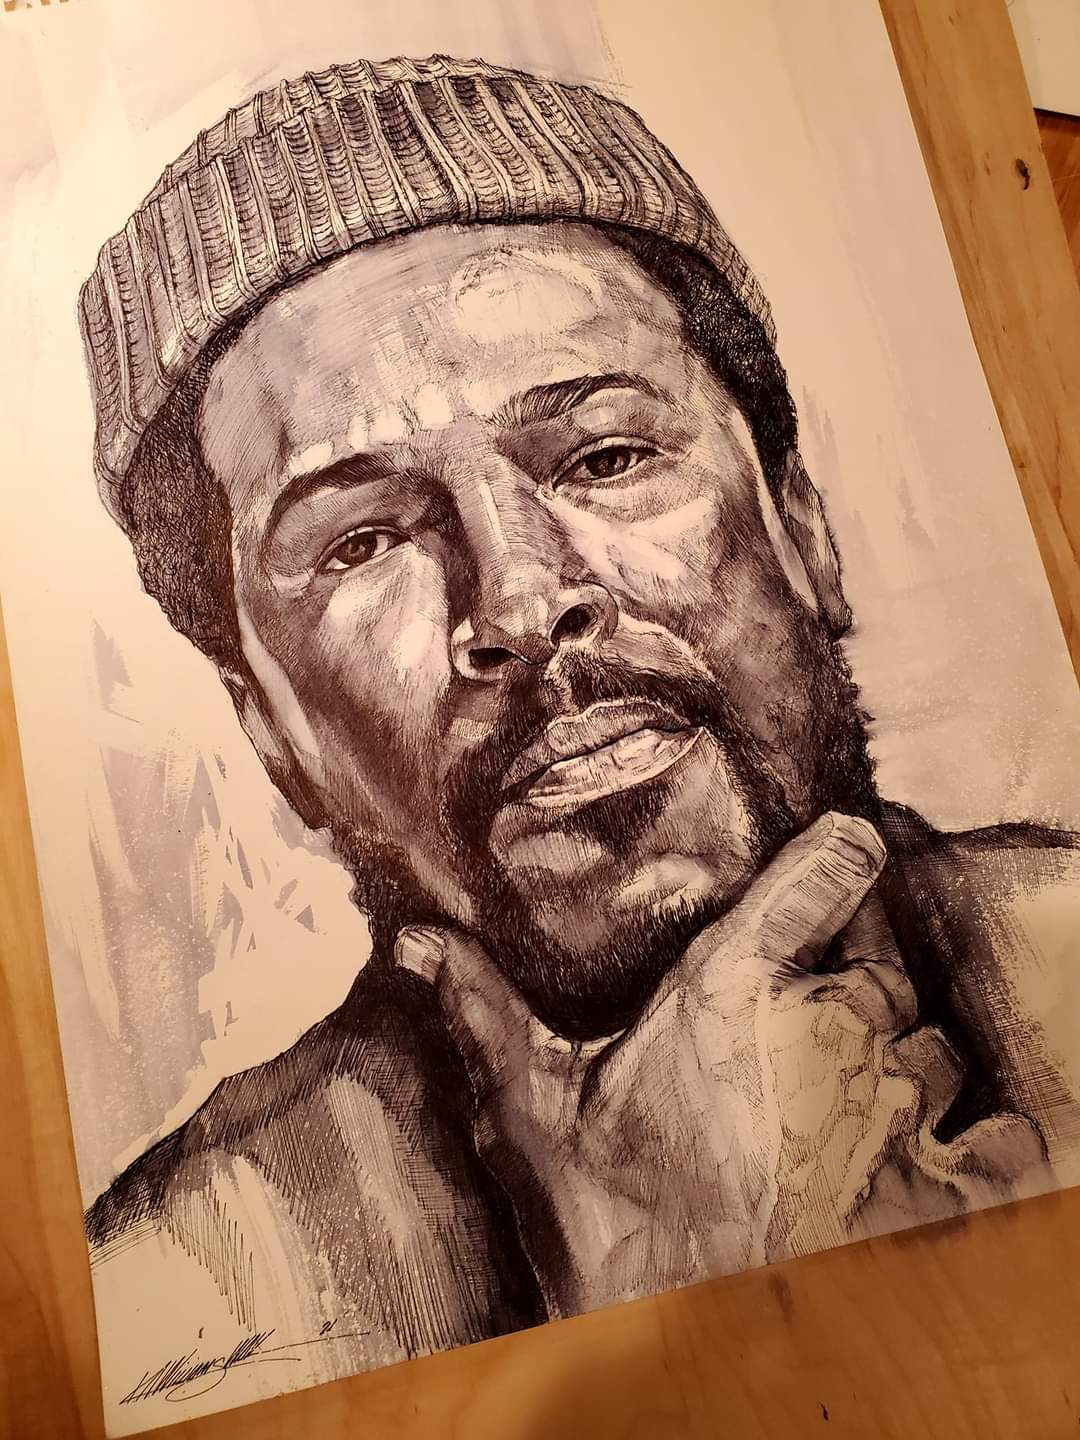 Kevin Wak Williams
Happy Birthday  Marvin Gaye   April 2, 1939
Ink on Watercolor Paper 
Private Collection 